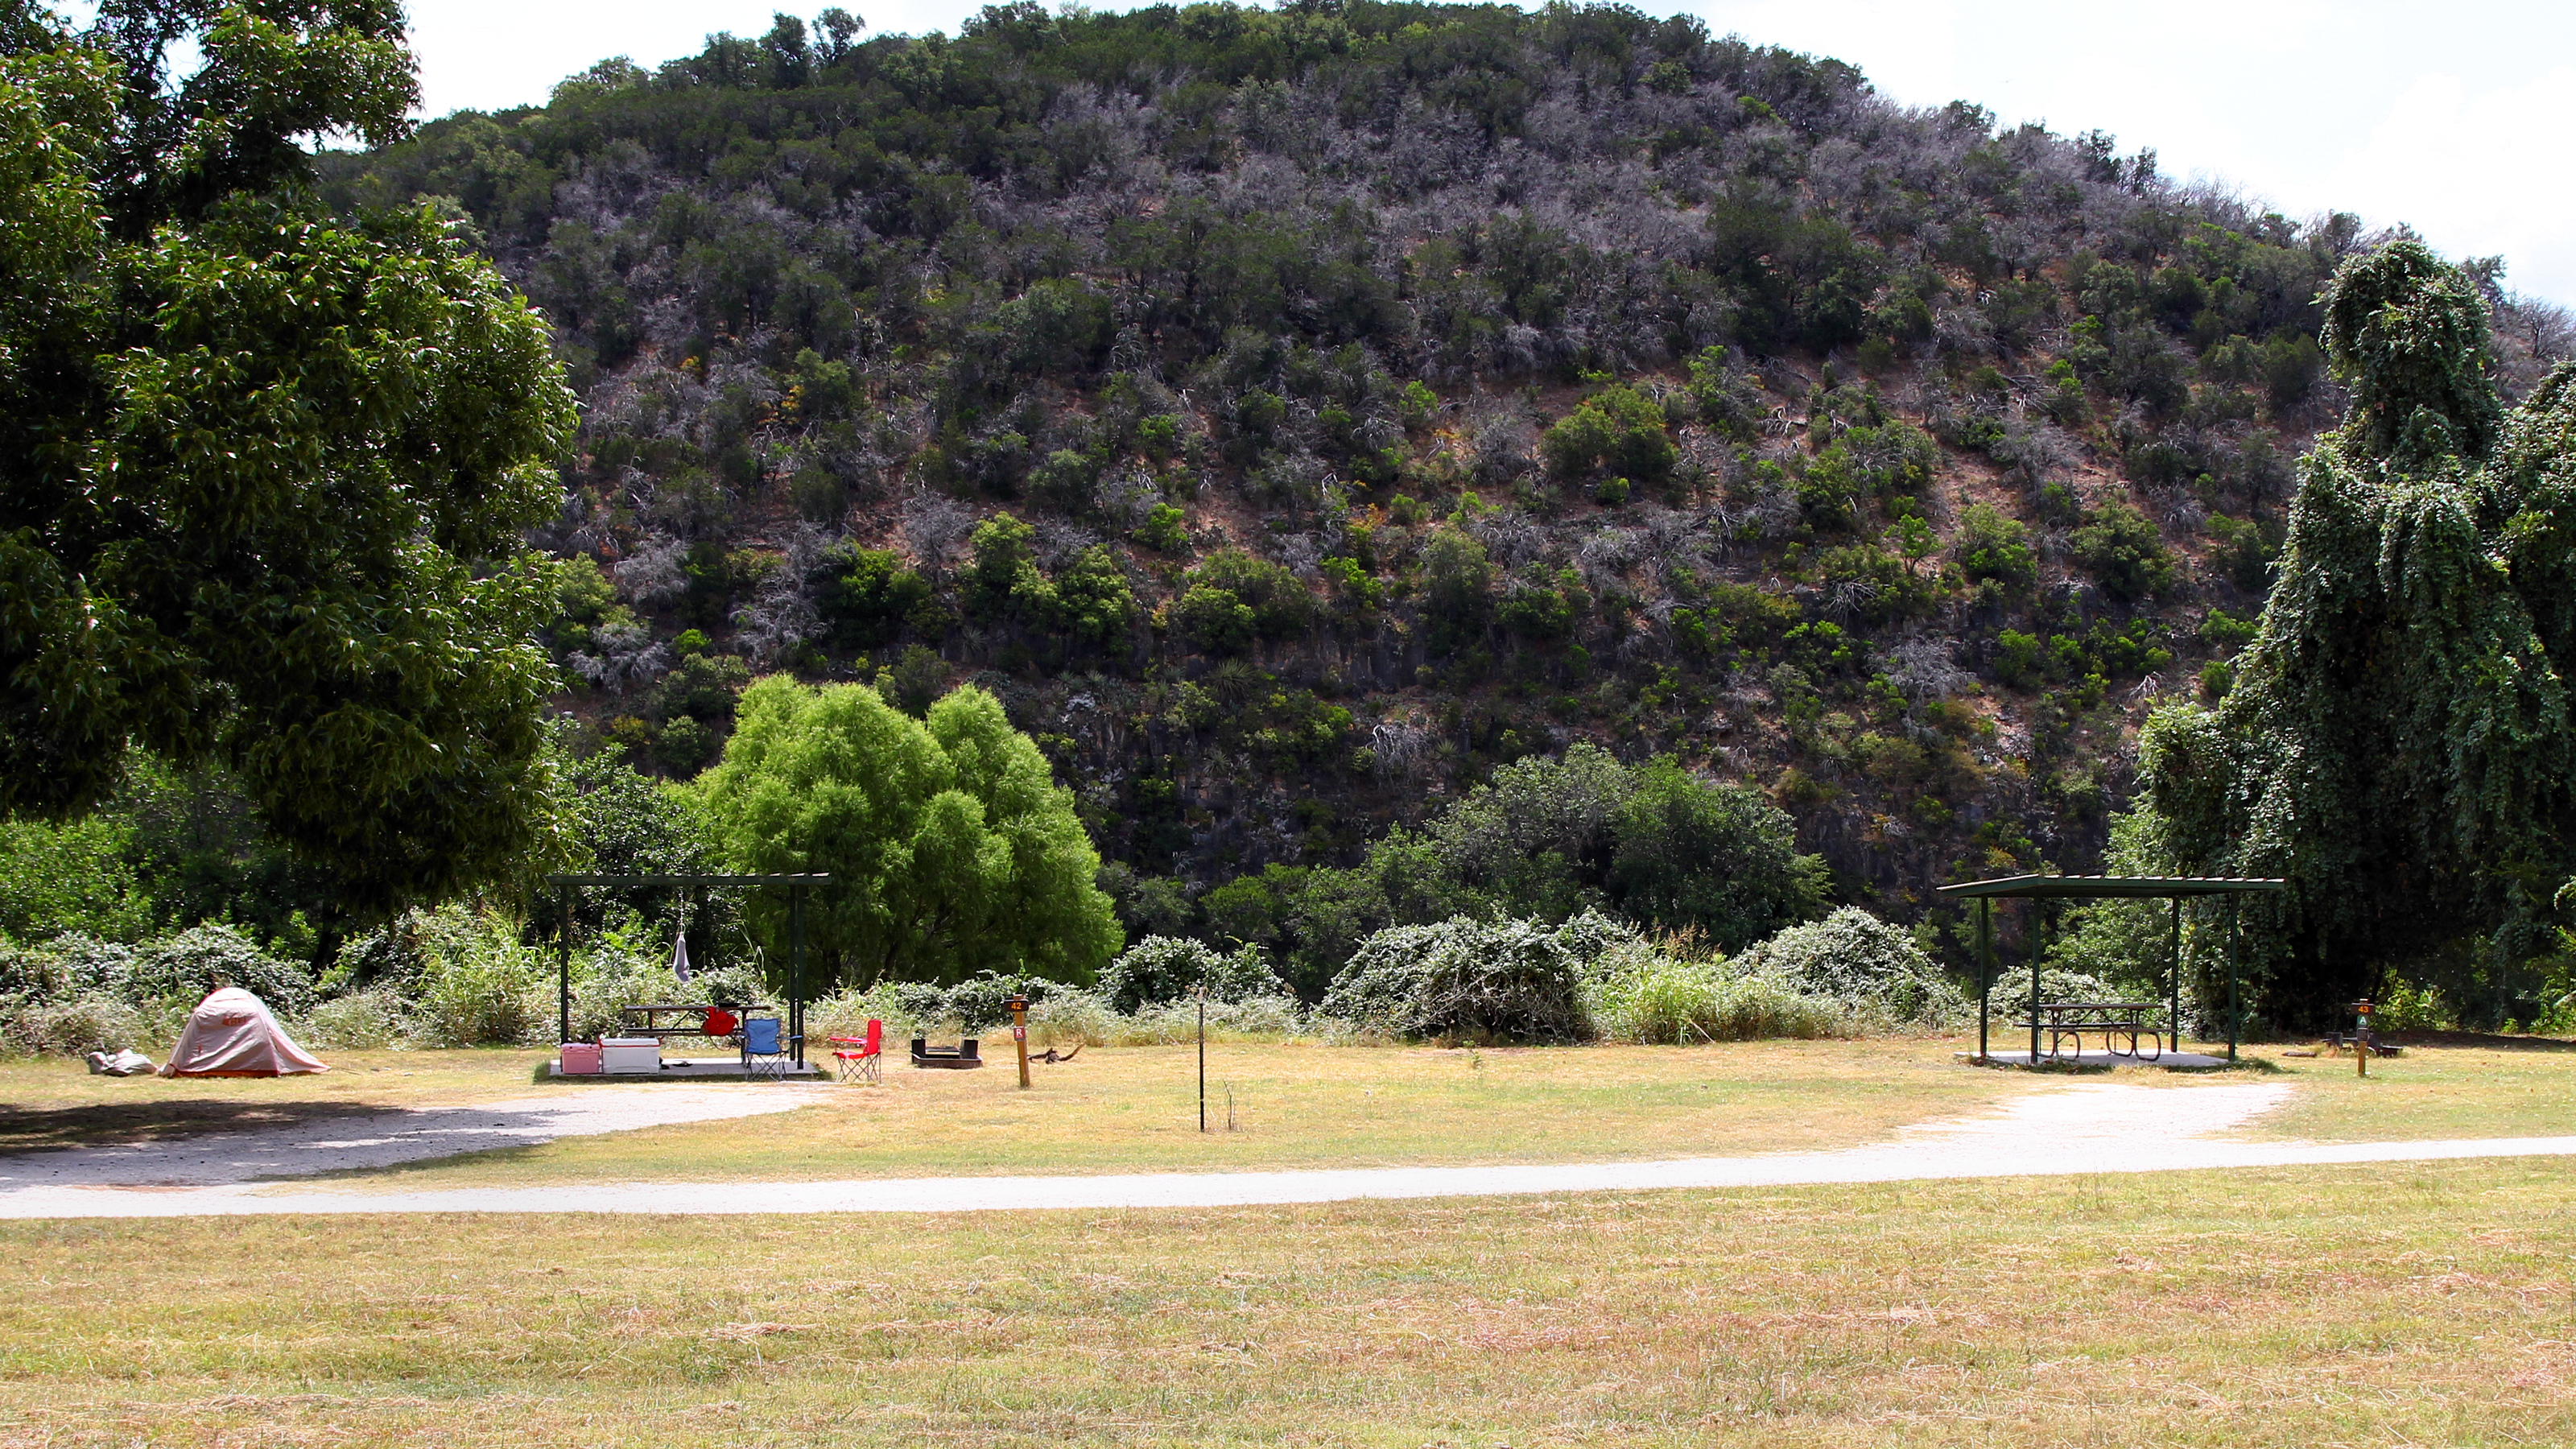 File:Camping Area Colorado Bend State Park Texas.jpg - Wikimedia Commons